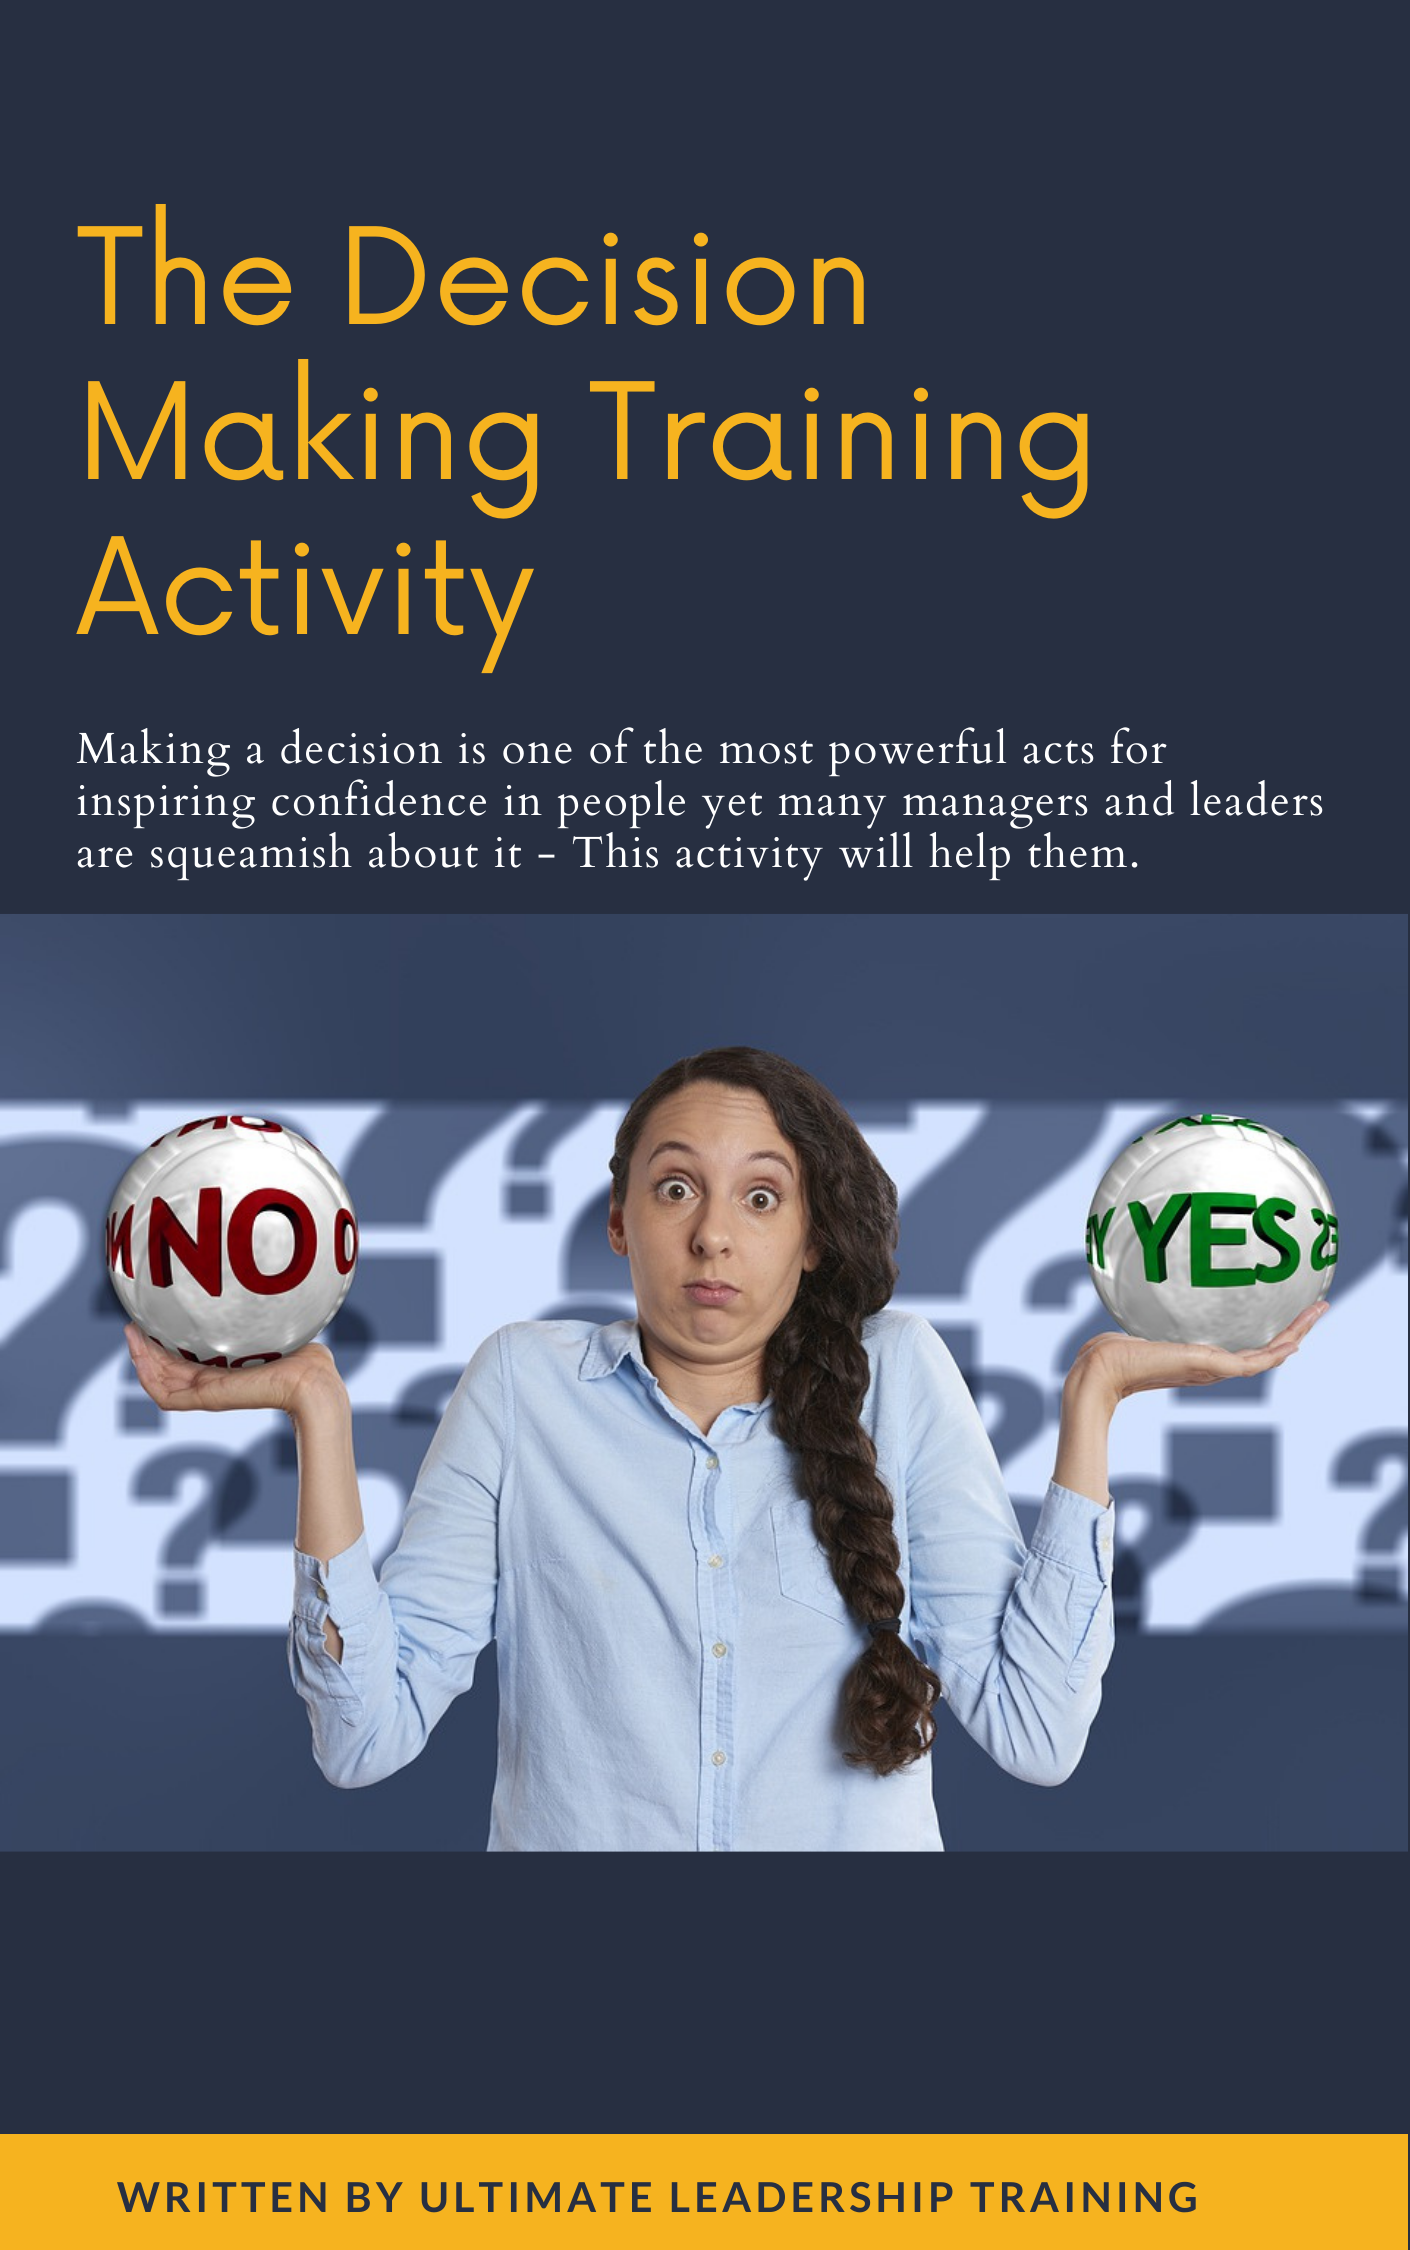 The Decision Making Training Activity